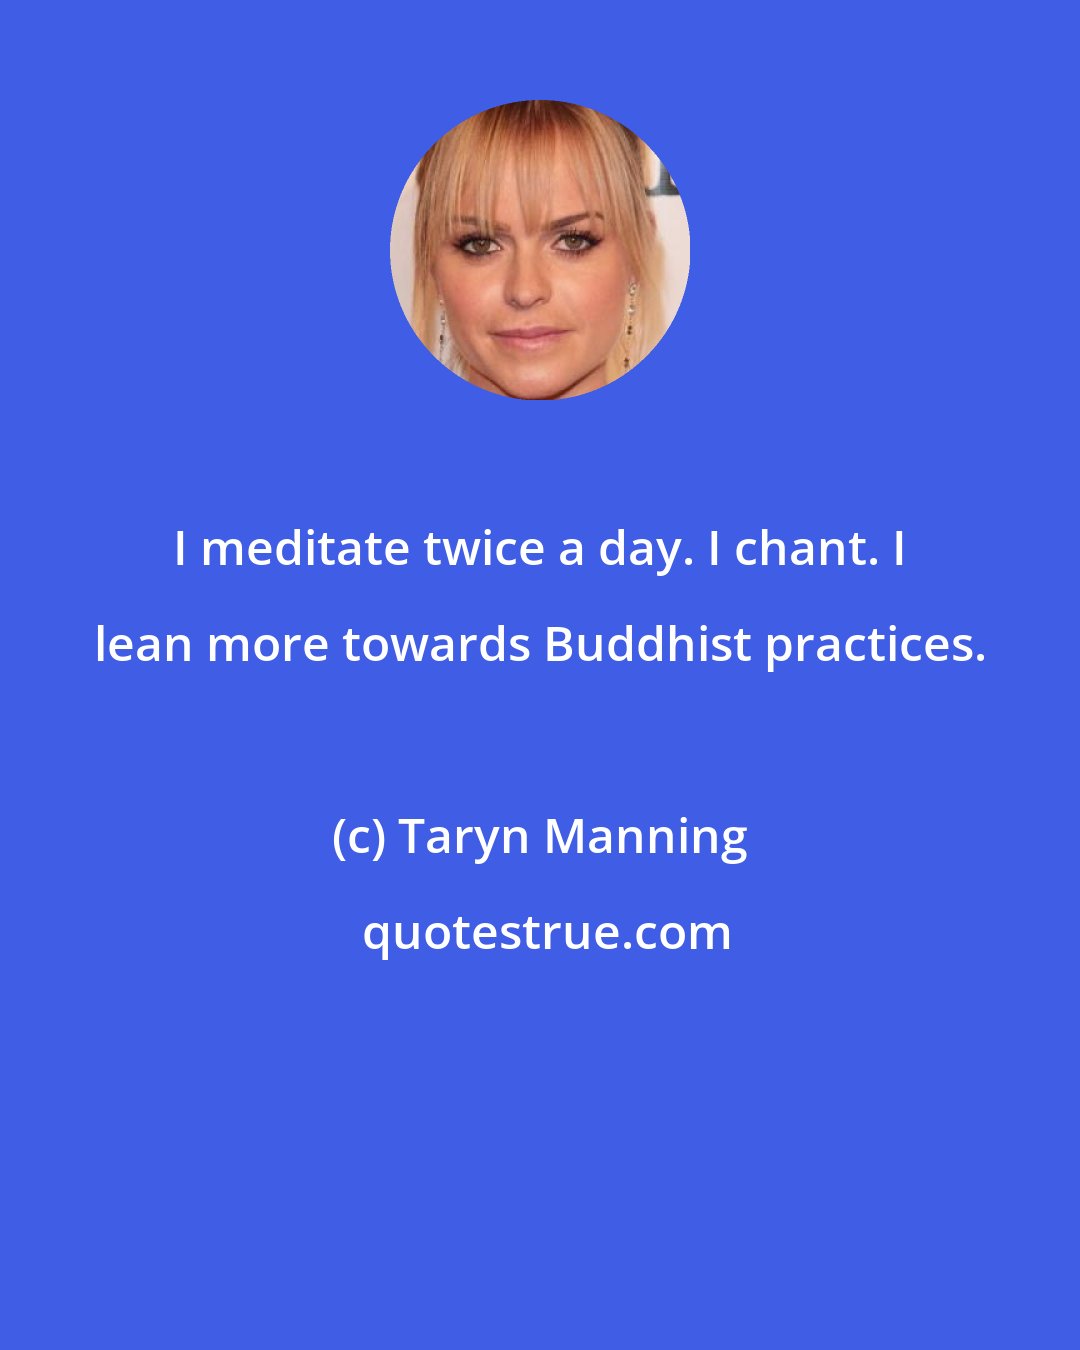 Taryn Manning: I meditate twice a day. I chant. I lean more towards Buddhist practices.